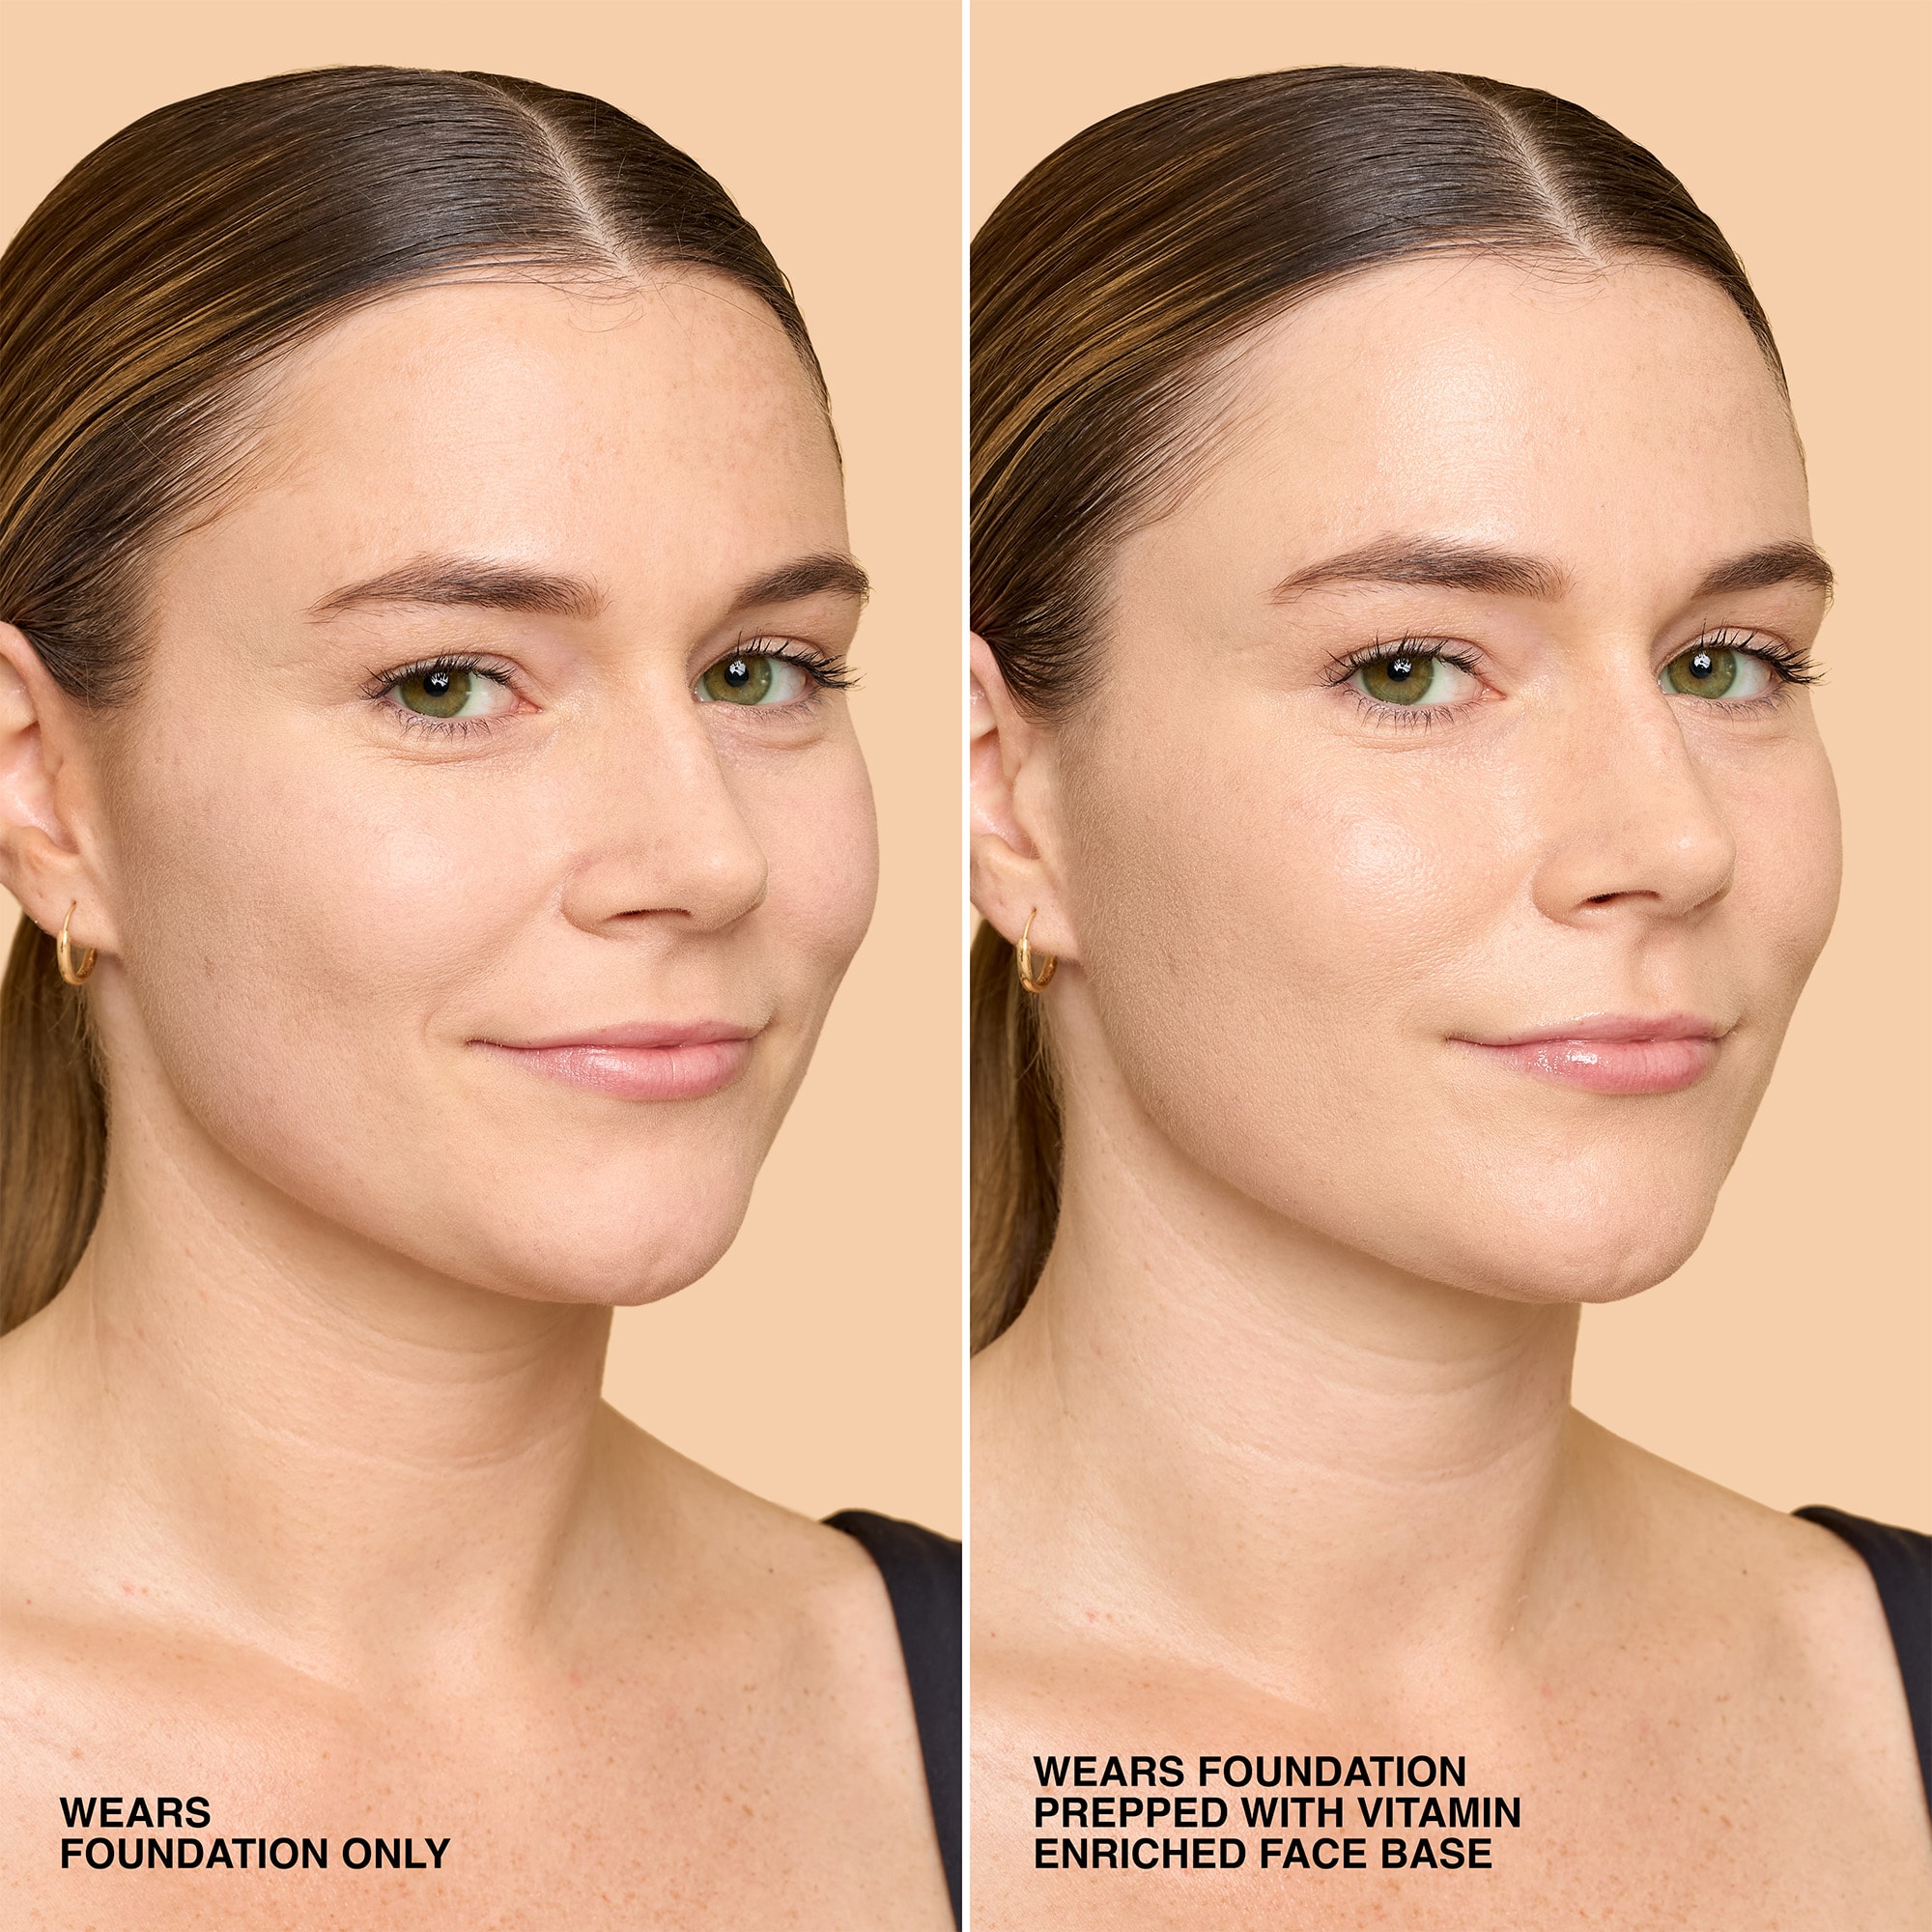 before and after of model with foundation only vs foundation and bobbi brown vitamin enriched face base